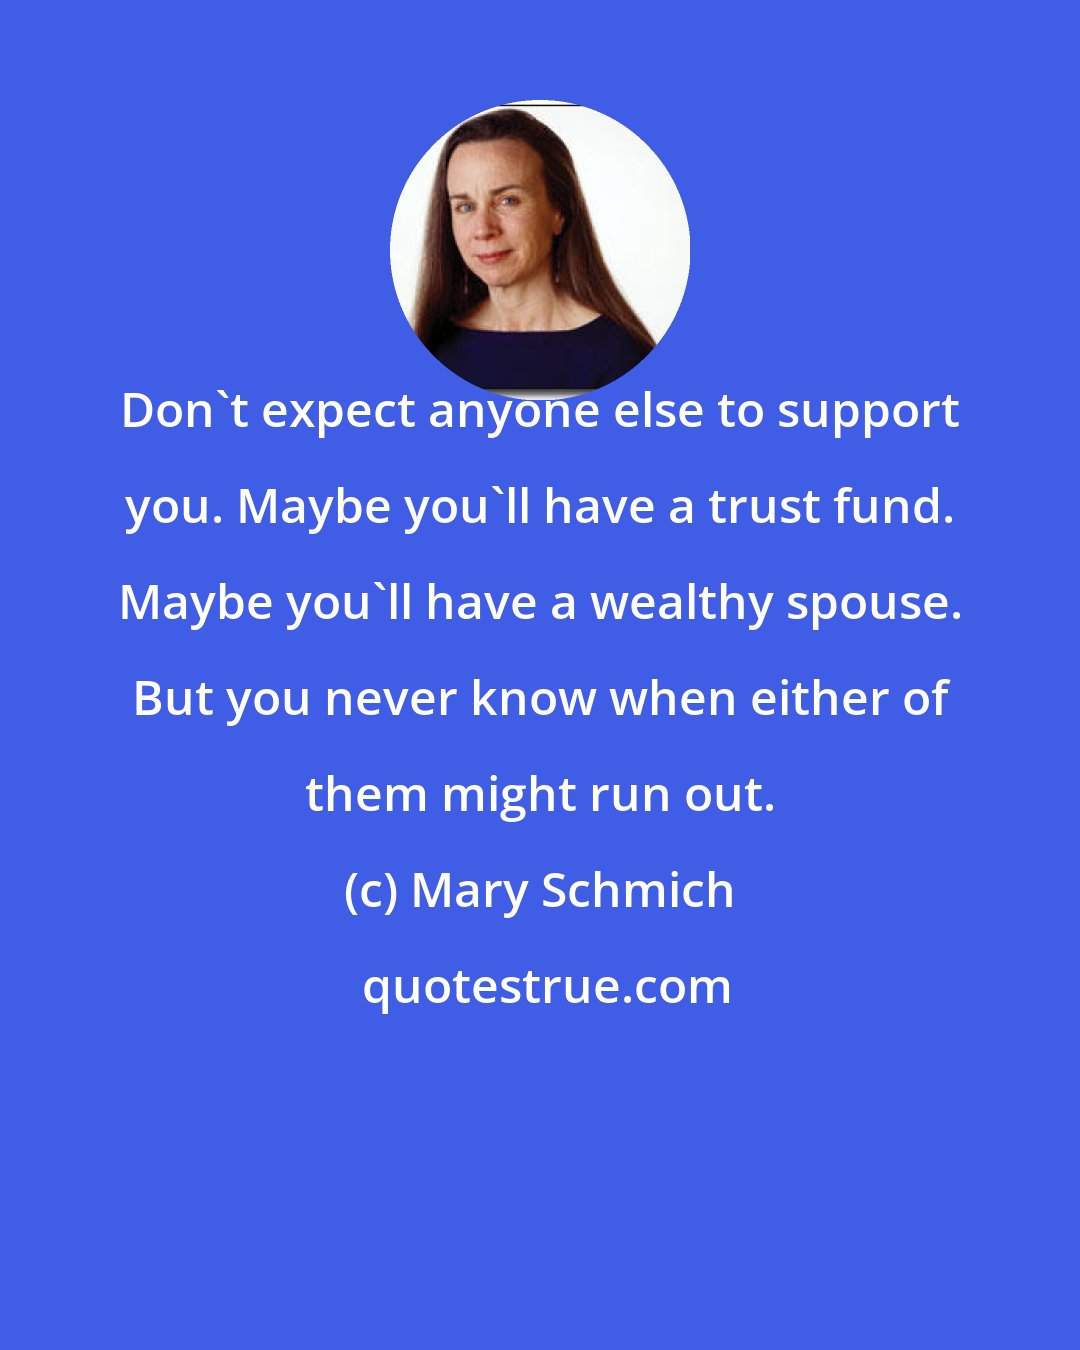 Mary Schmich: Don't expect anyone else to support you. Maybe you'll have a trust fund. Maybe you'll have a wealthy spouse. But you never know when either of them might run out.